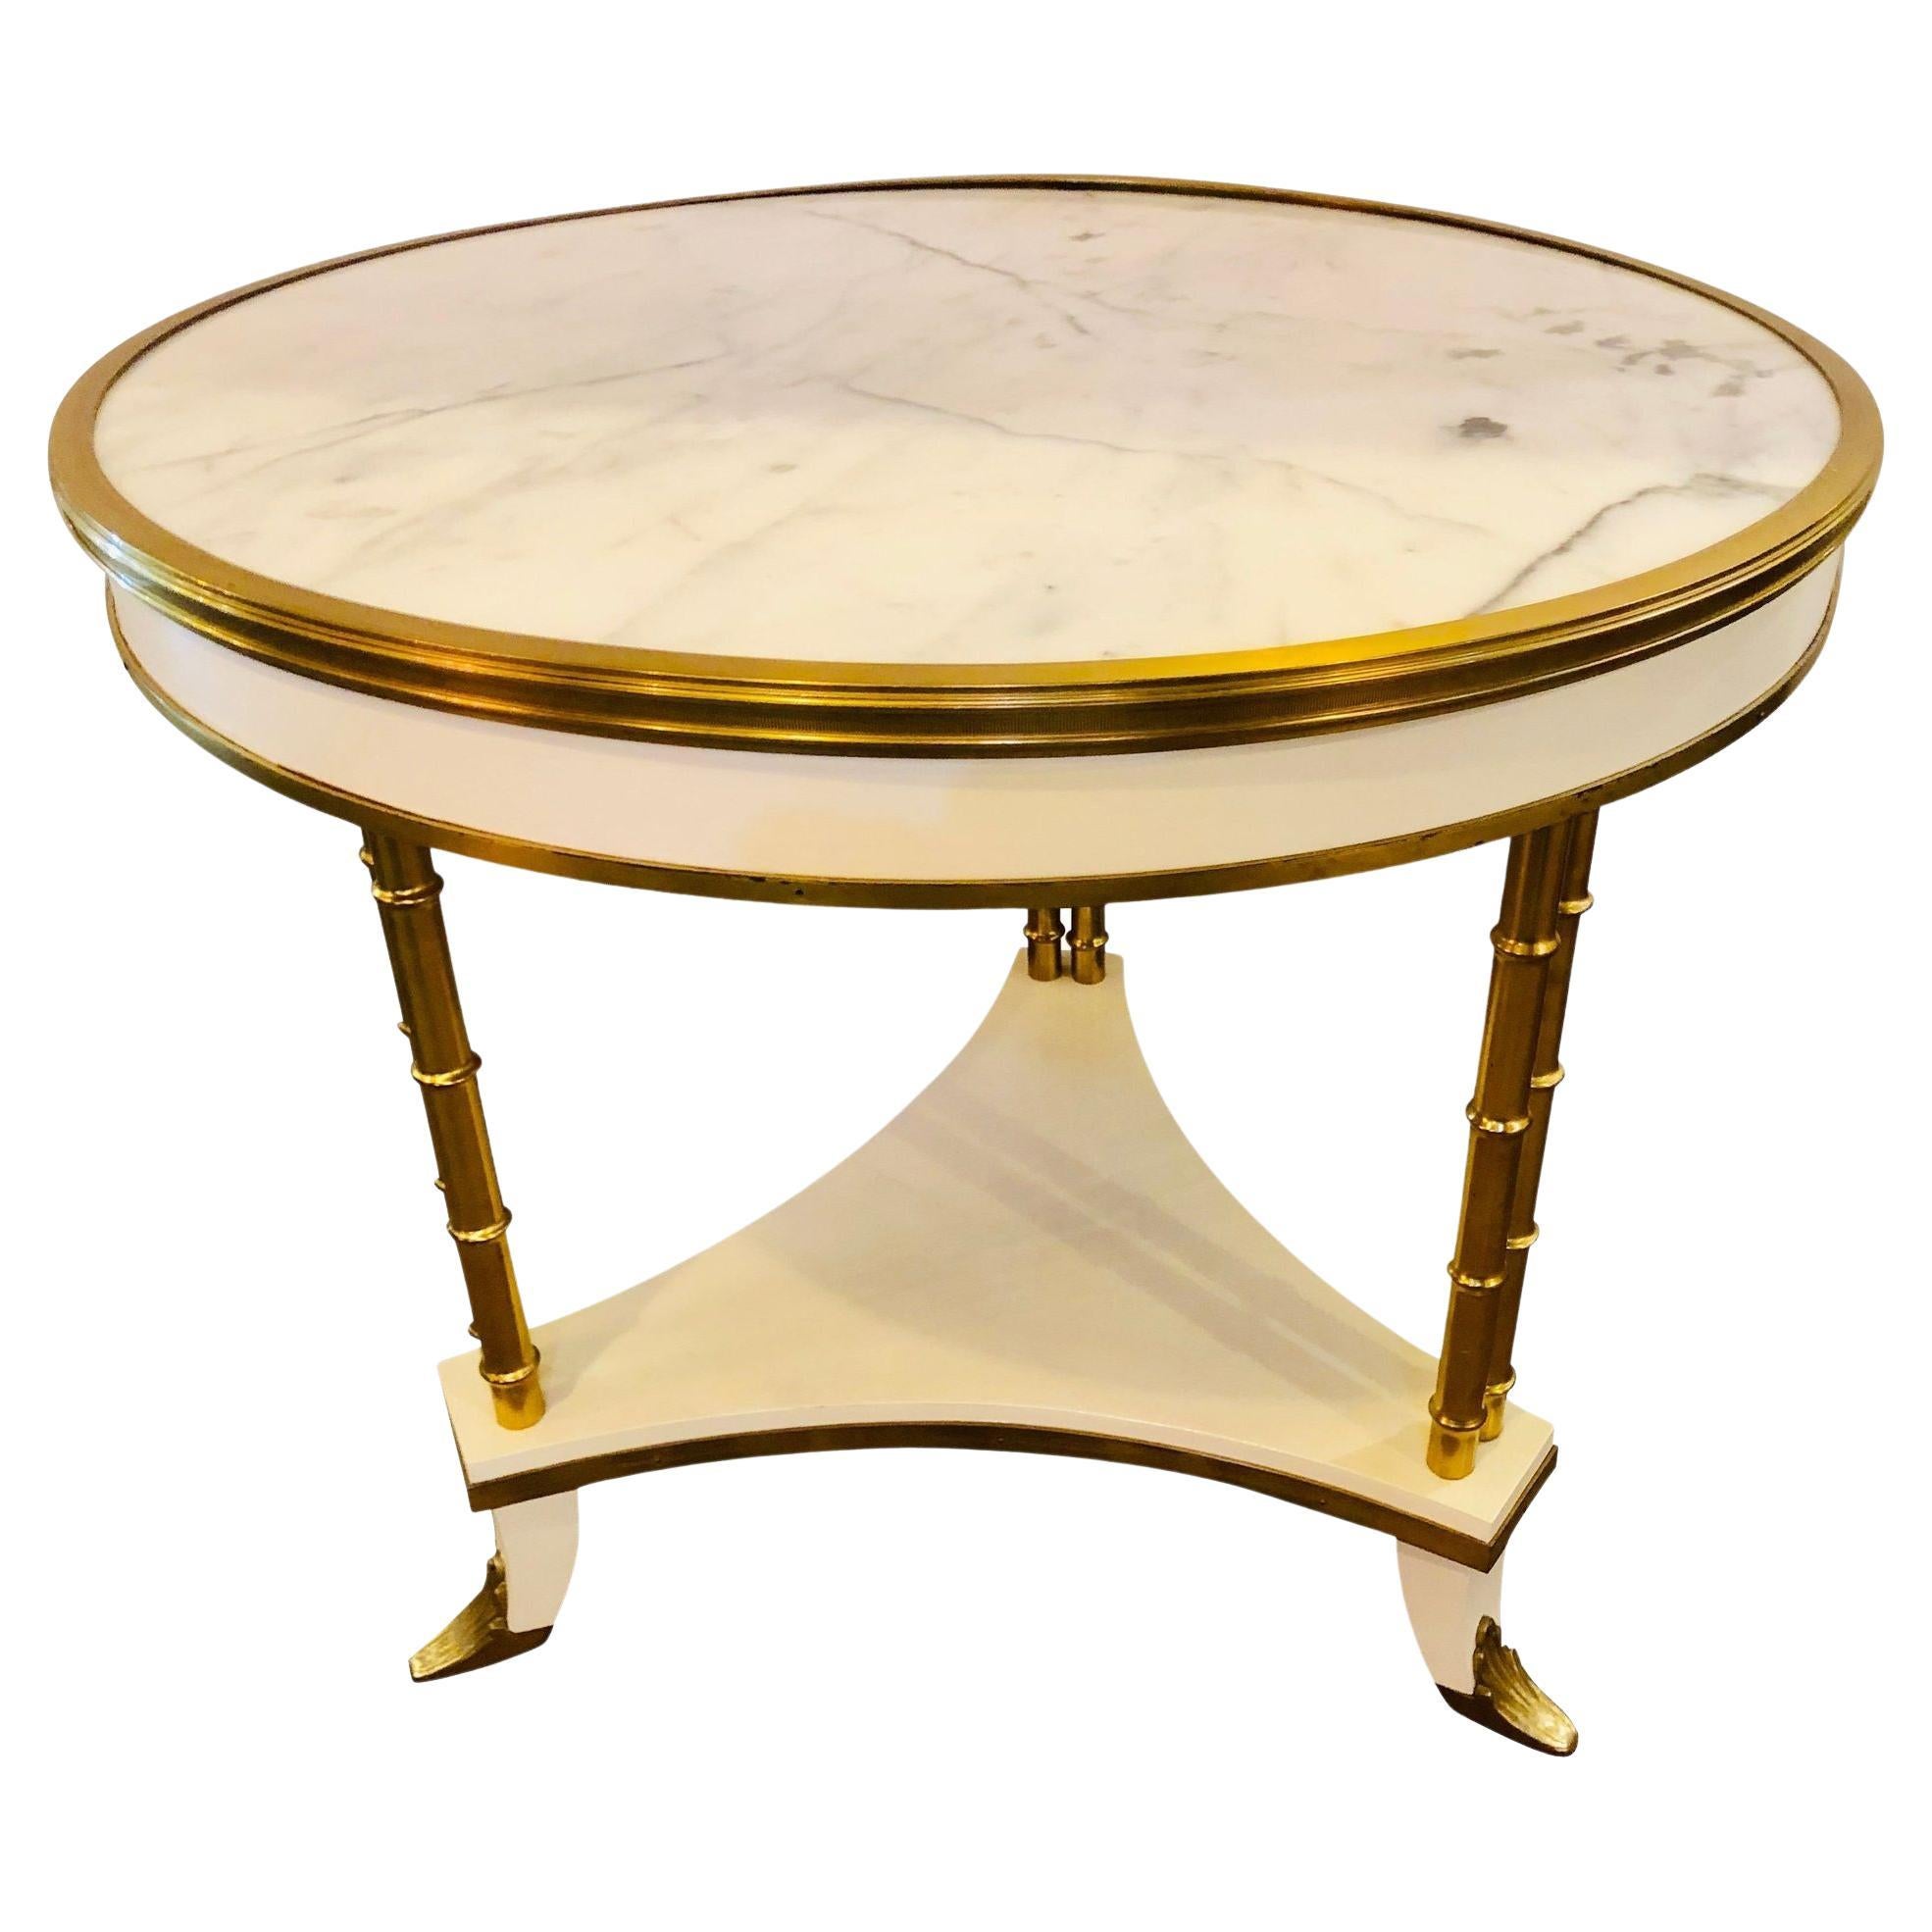 White Lacquered Brass Mounted Marble Top Bouilliote Table Style of Maison Jansen For Sale